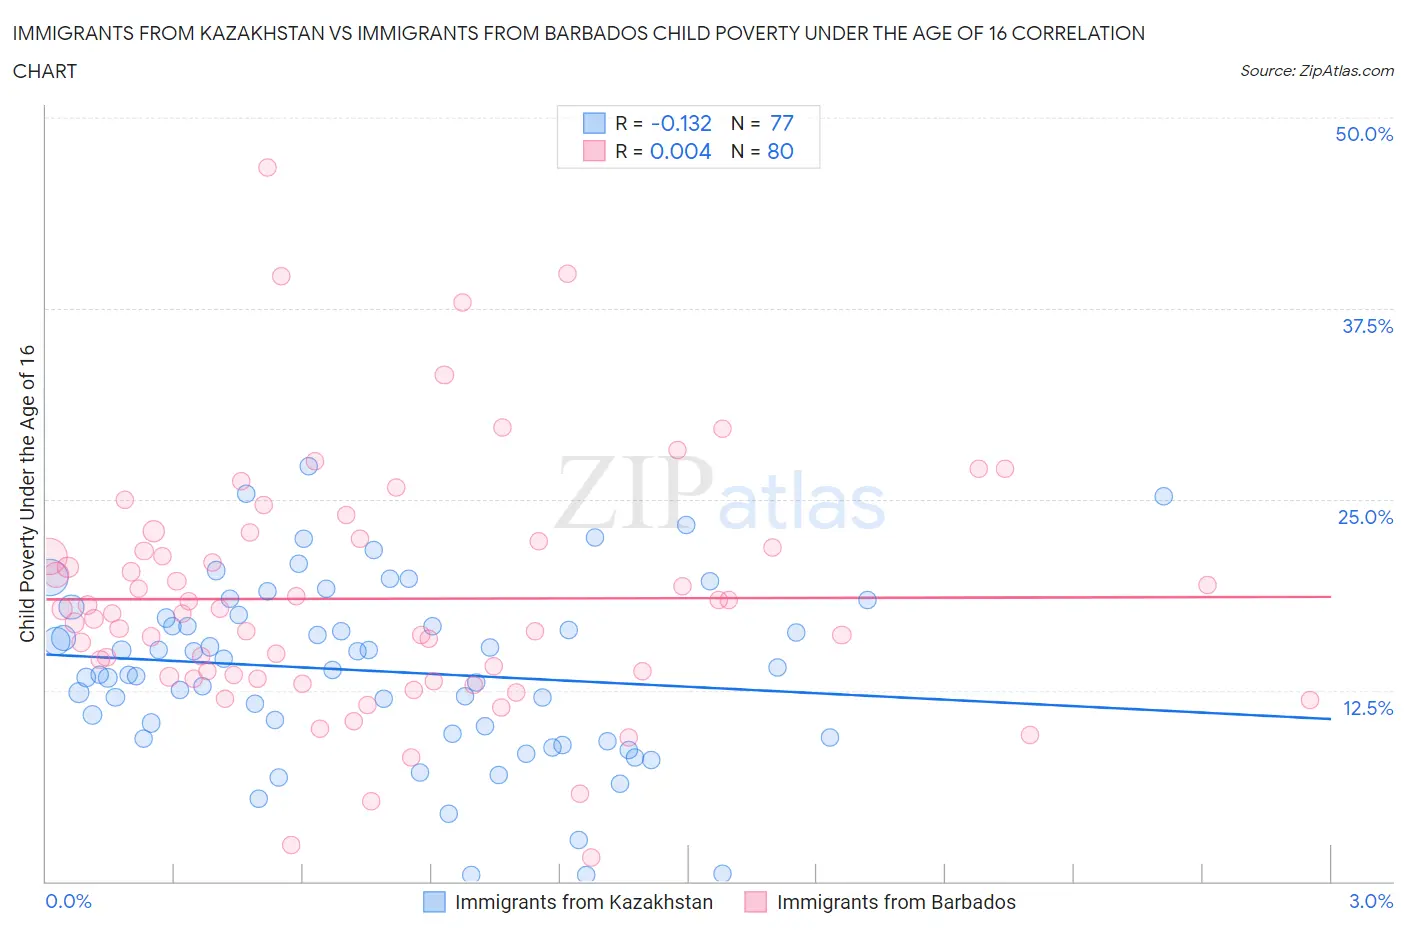 Immigrants from Kazakhstan vs Immigrants from Barbados Child Poverty Under the Age of 16